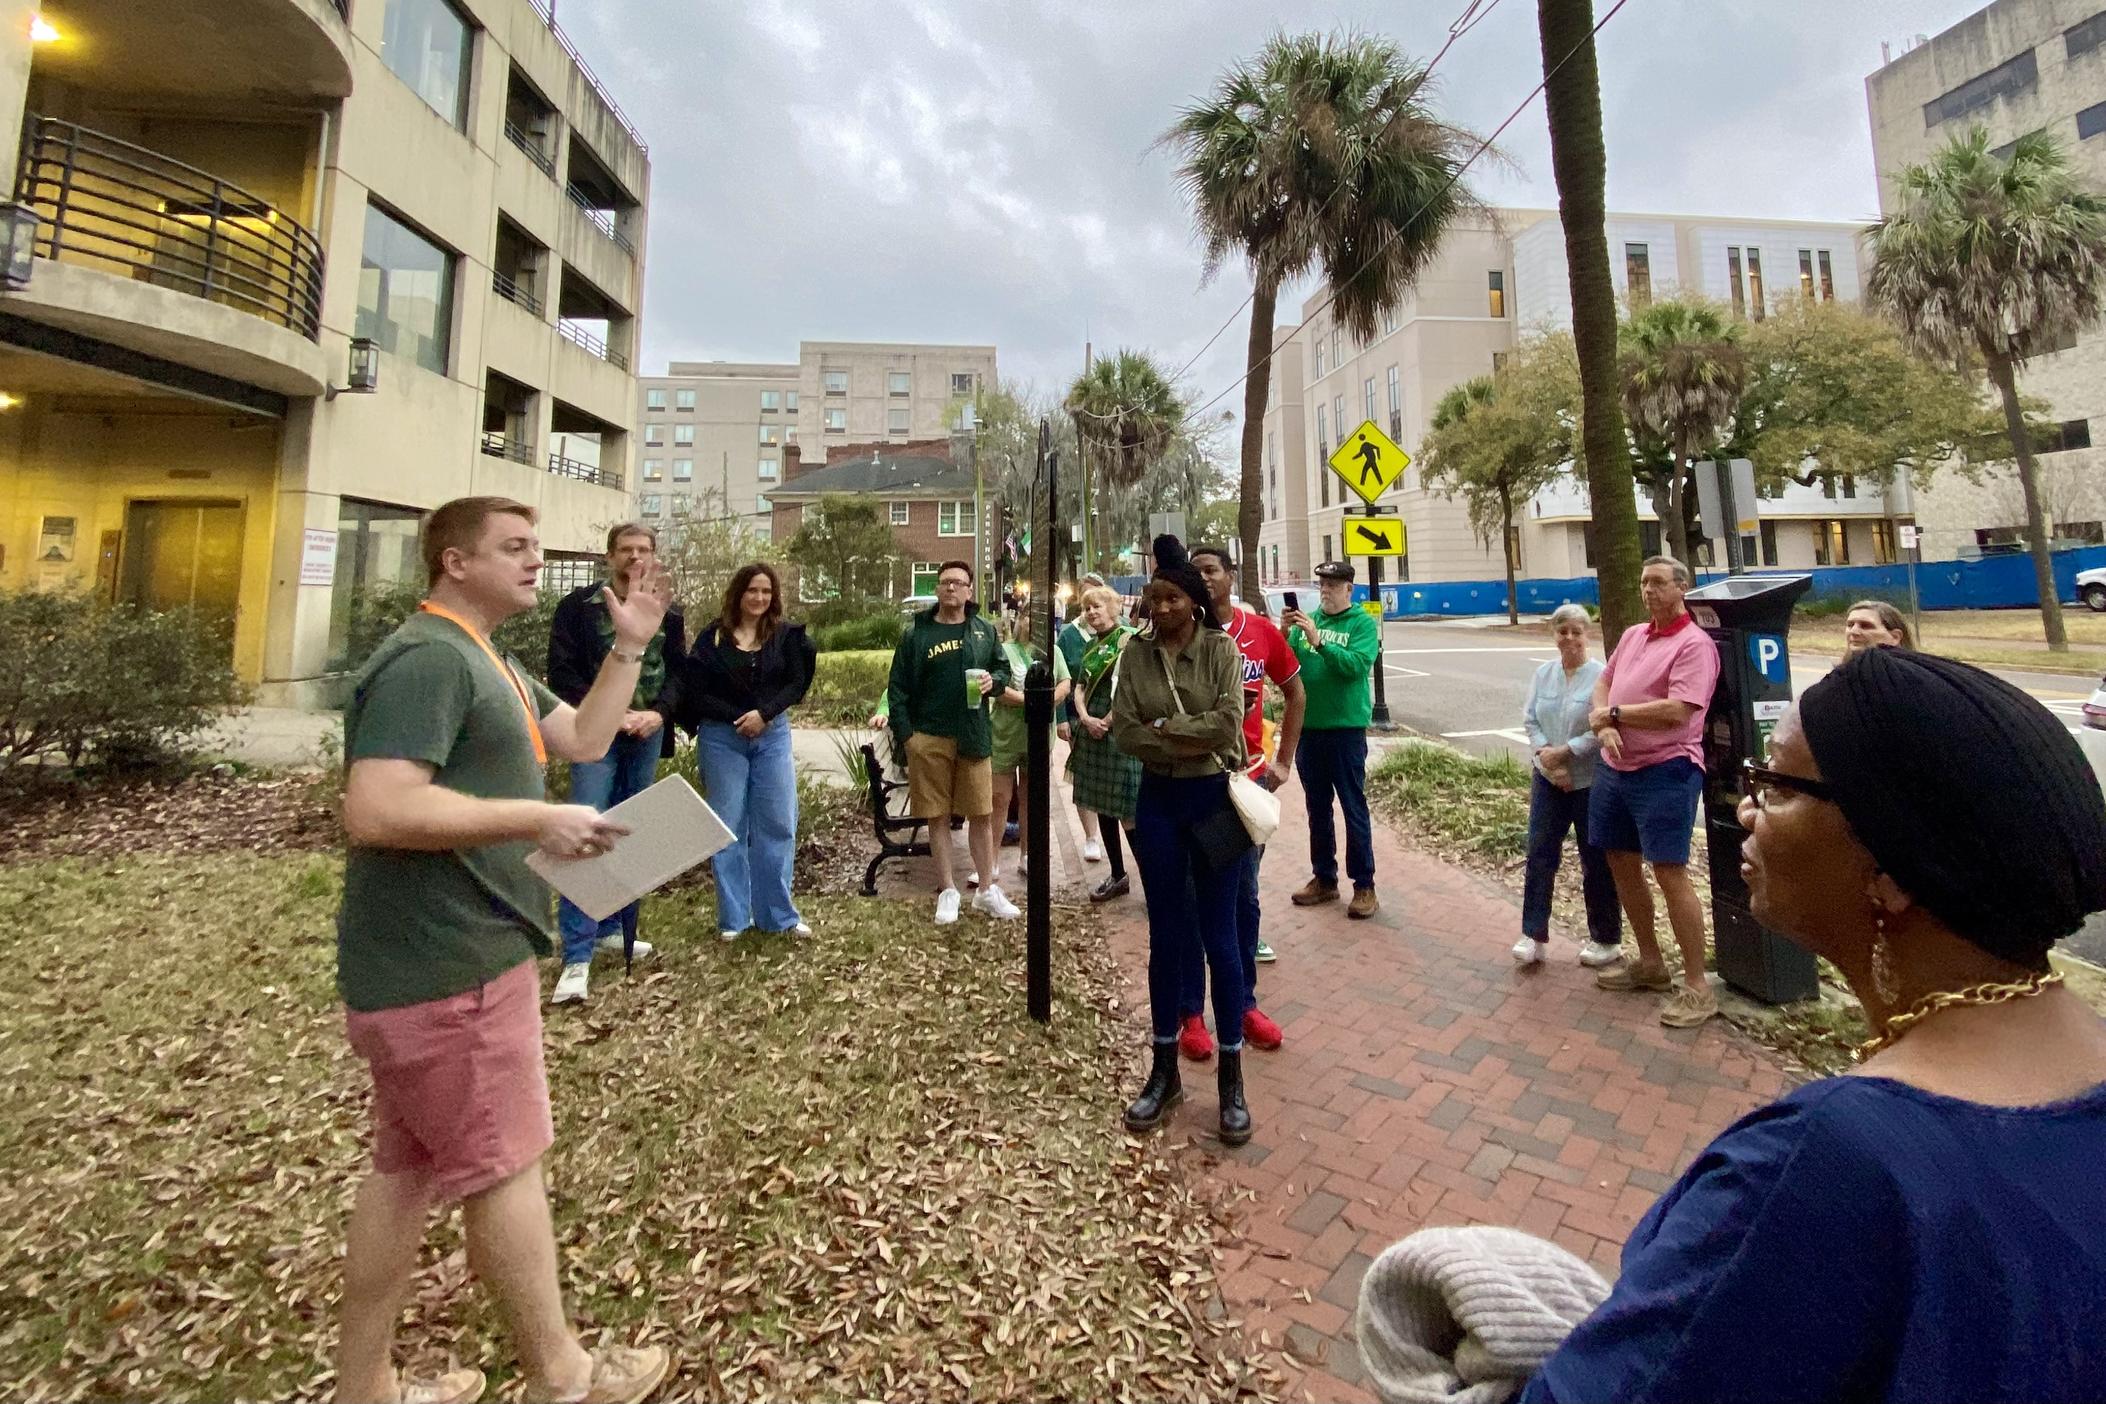 Brandon Carter, far left, begins a historical tour in downtown Savannah near the site of the now-gone St. John the Baptist Church, where Catholic Bishop John England ushered in the city's first public St. Patrick's Day parade on March 17, 1824.